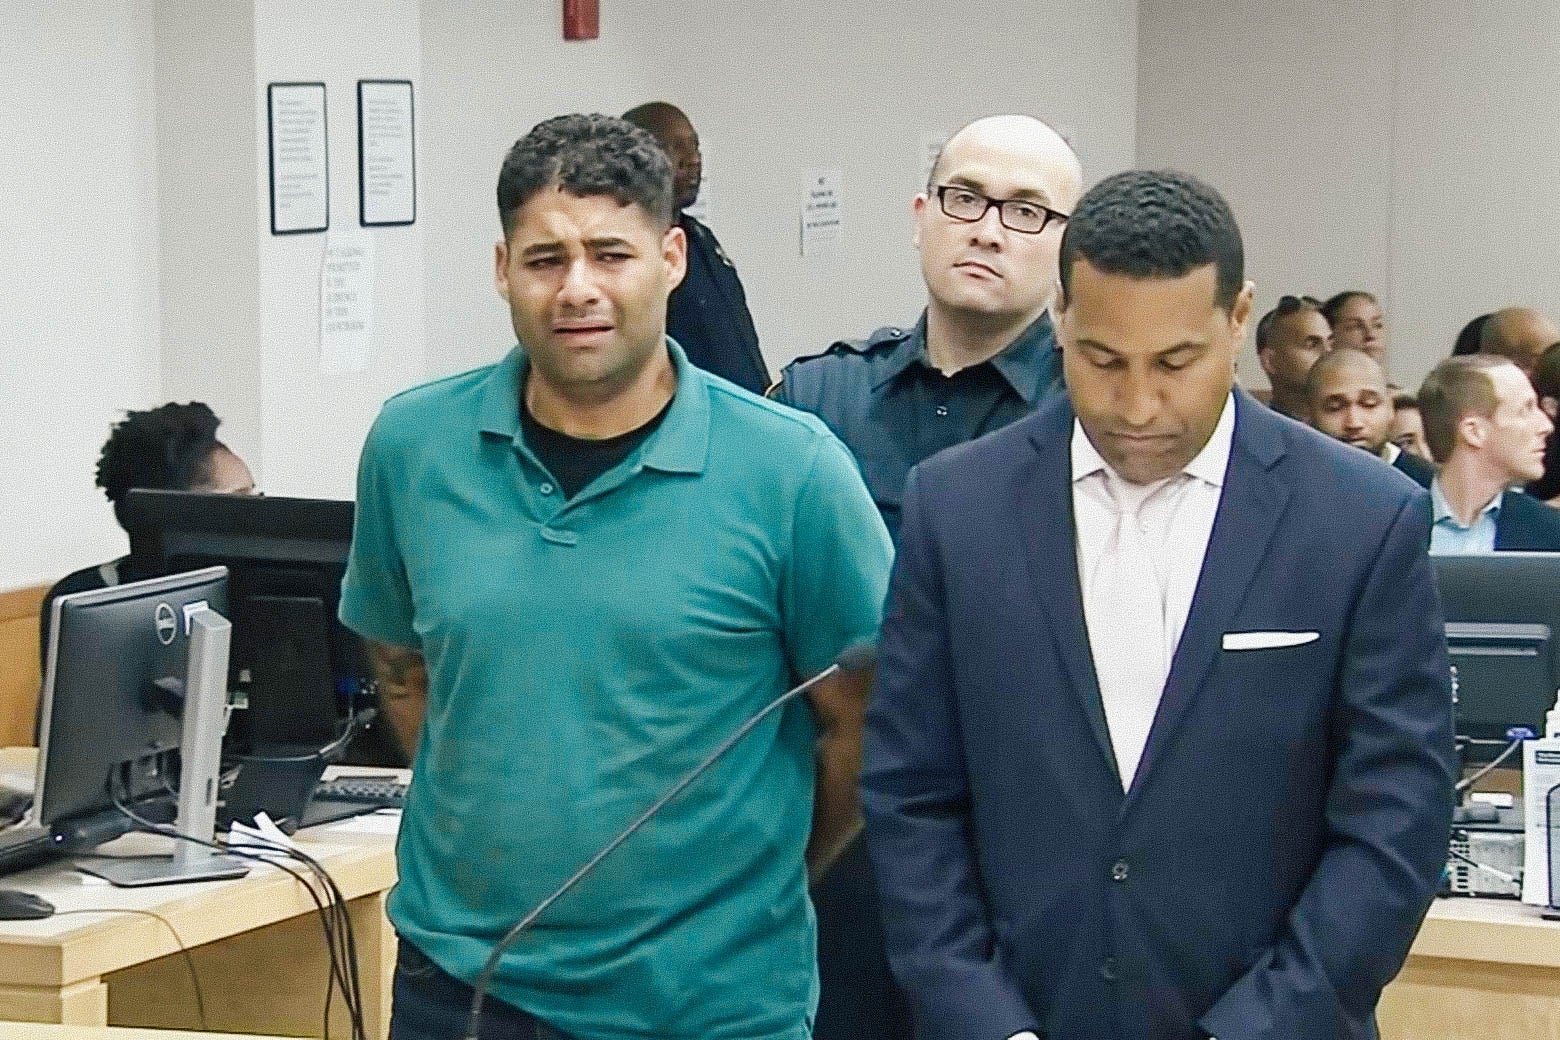 Juan Rodriguez looking anguished, standing with his arms behind his back in court.